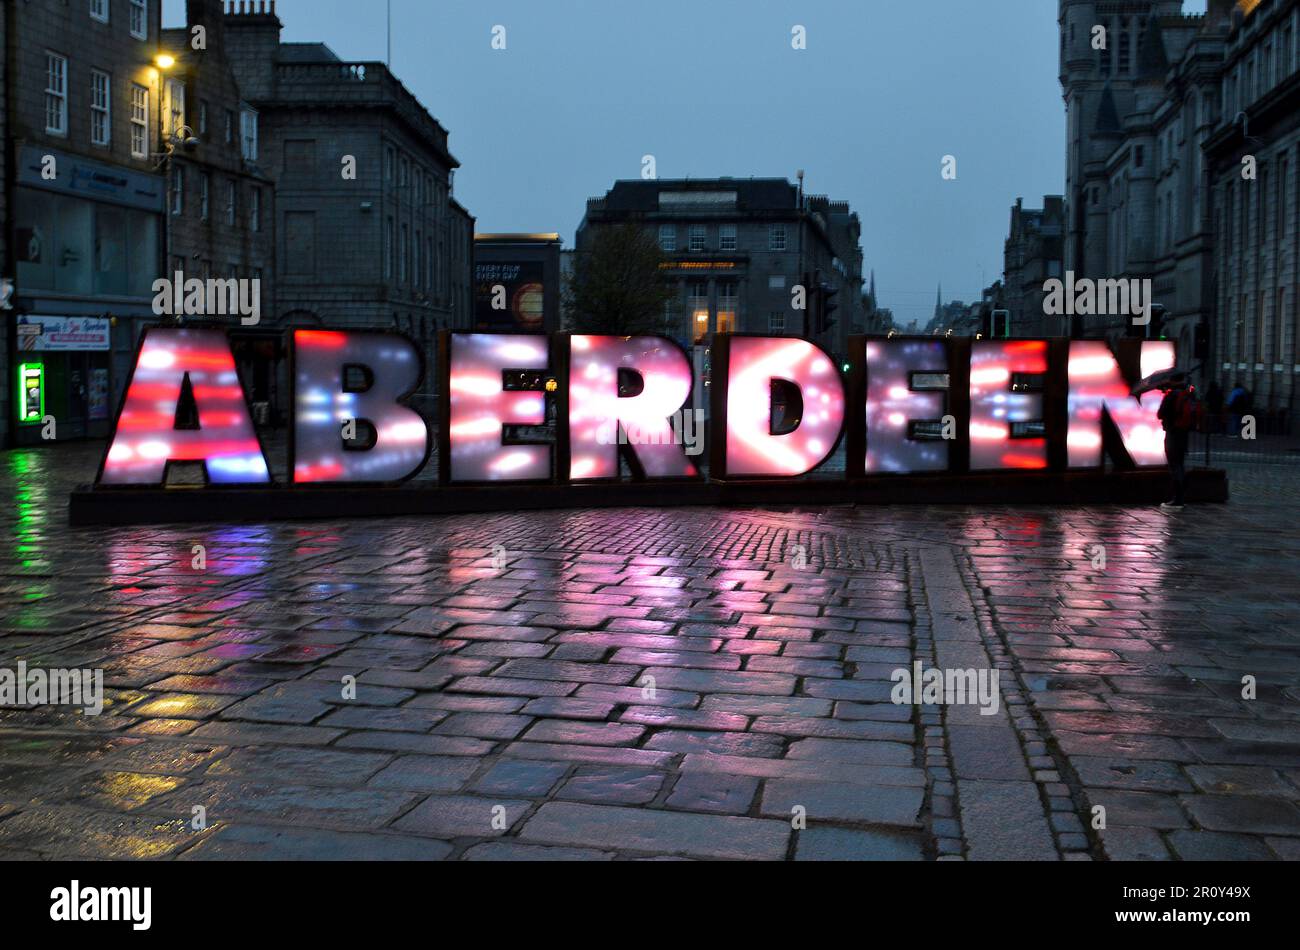 ABERDEEN, SCOTLAND - 9 MAY 2023: The new Aberdeen sign installed on the Castlegate. Standing two metres tall,i t is illuminated by 98,000 light bulbs. Stock Photo